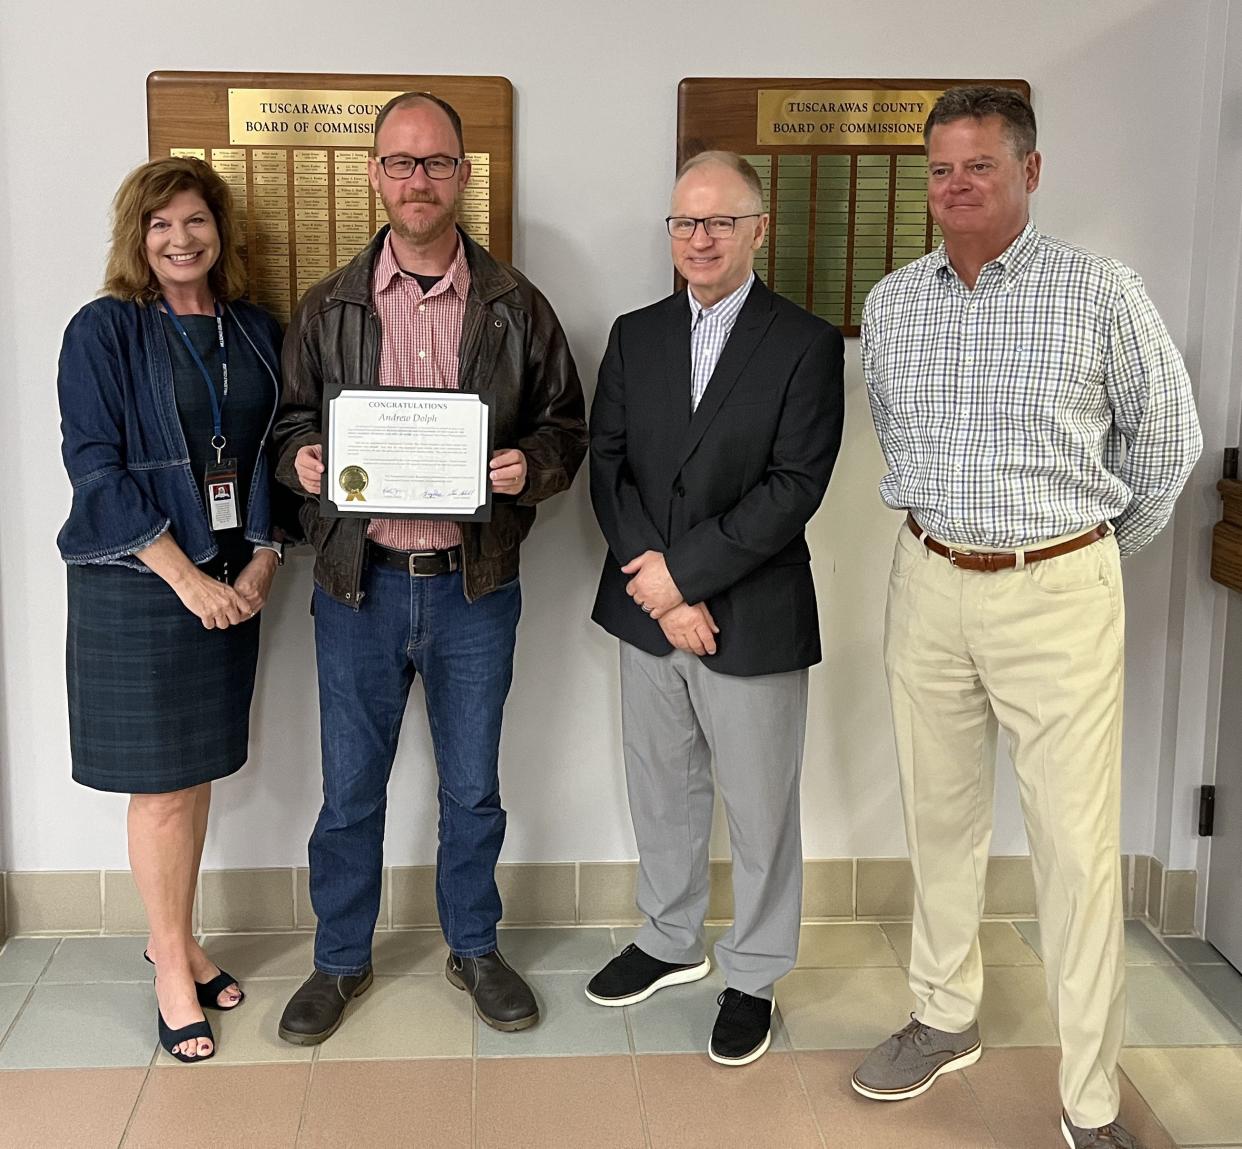 Times-Reporter photographer Andrew Dolph was honored Wednesday by Tuscarawas County commissioners for being named one of the Ohio News Photographers Association photographers of the year for 2023. Pictured with him are commissioners Kristin Zemis, Chris Abbuhl and Greg Ress.